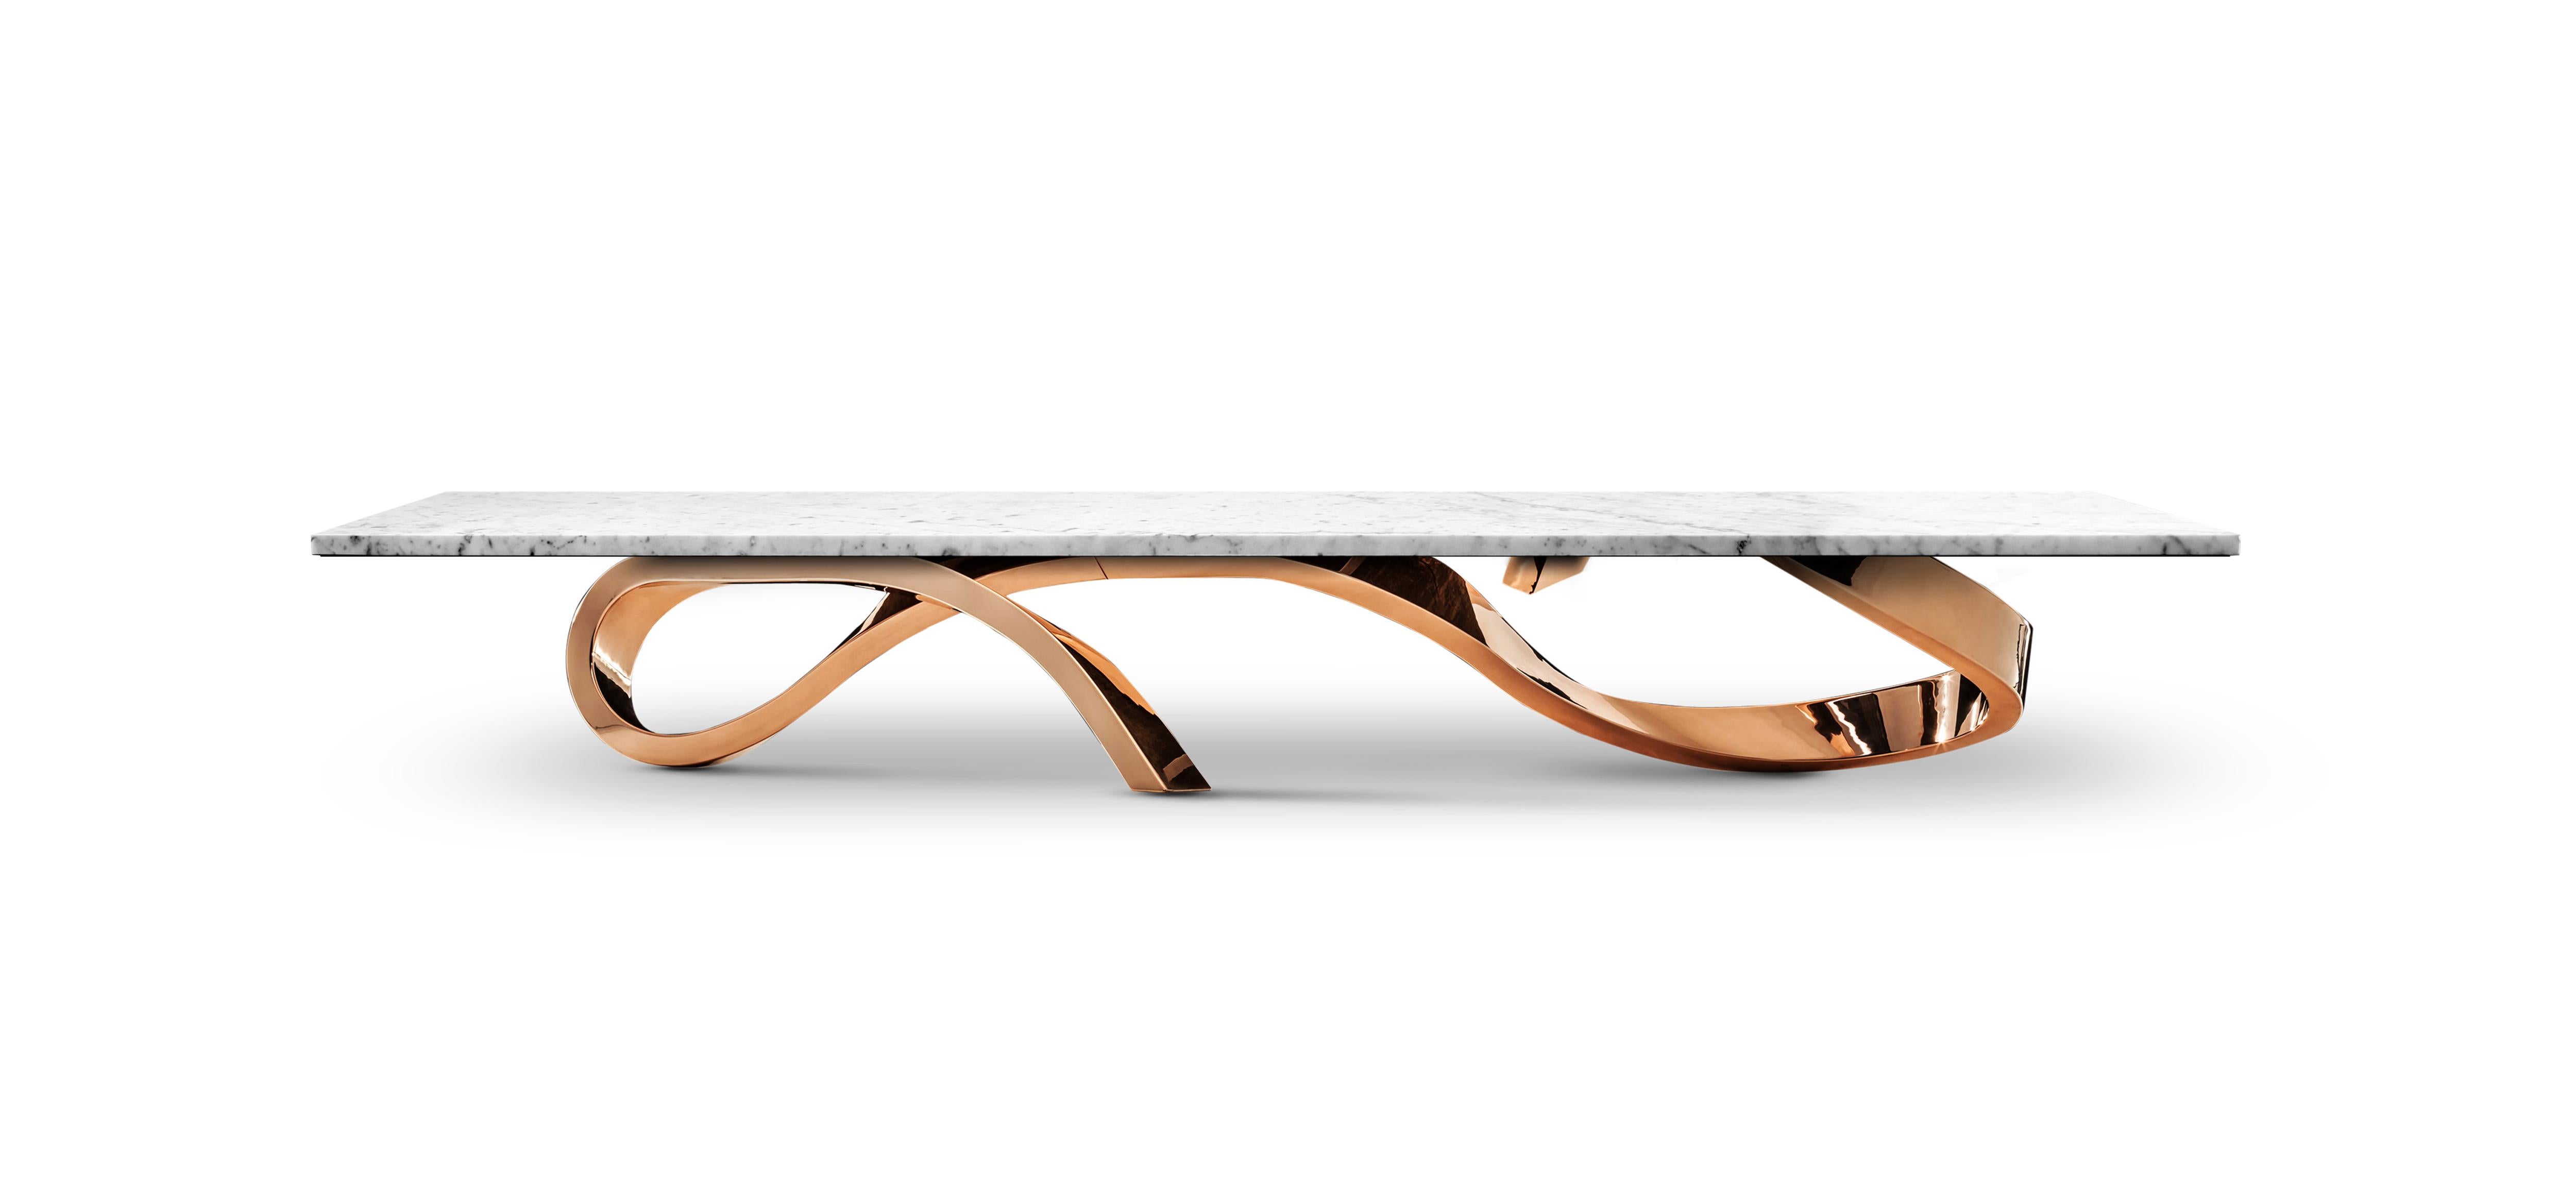 Modern Contemporary Apate Coffee Table in Marble, Brass, Copper For Sale